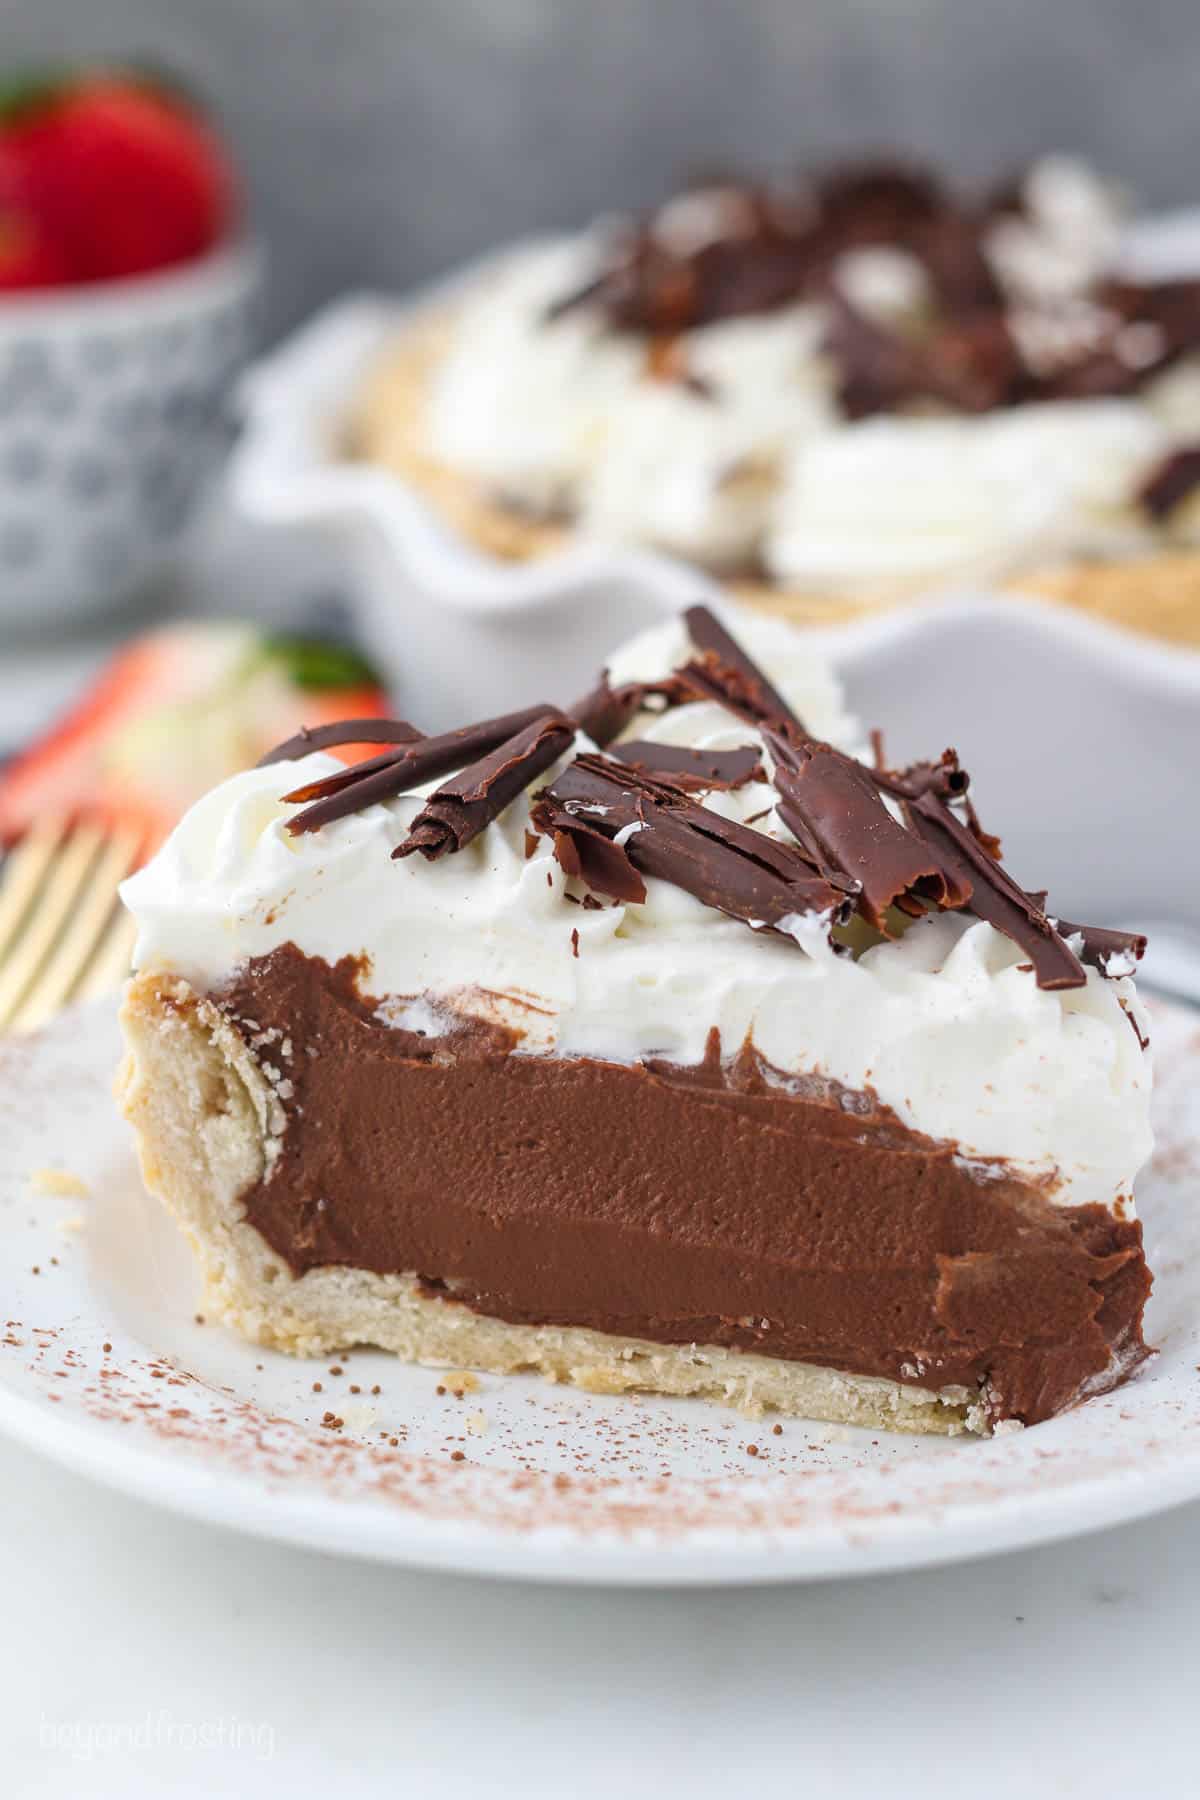 A close up image of a slice of chocolate pie with whipped cream and chocolate shavings